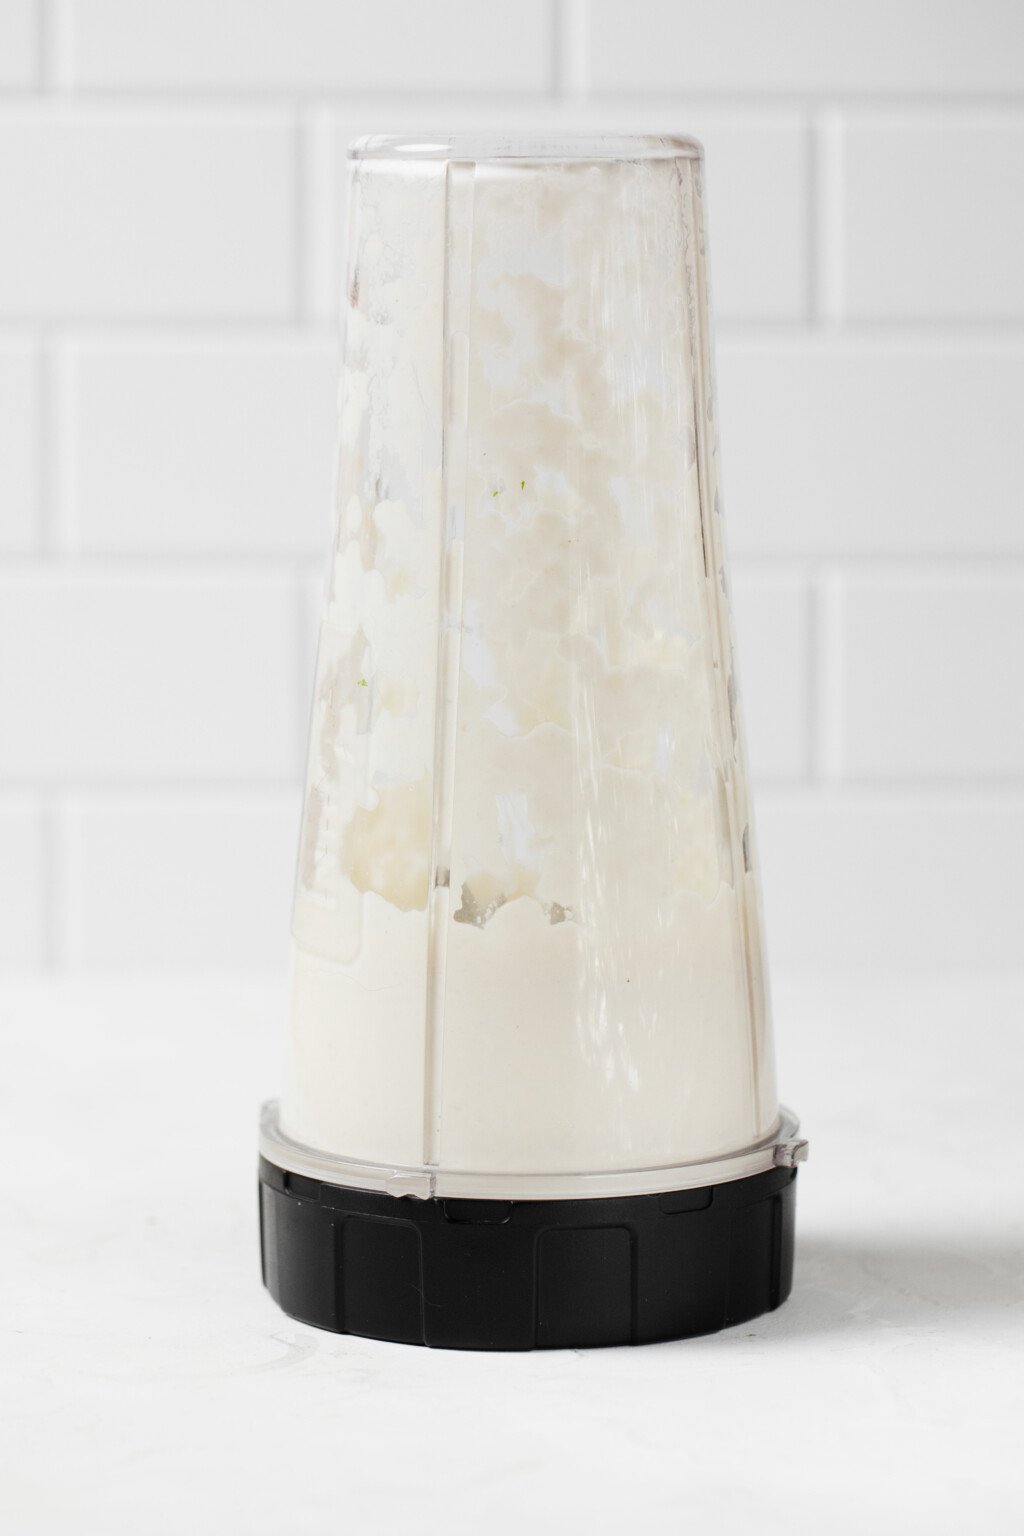 A personal sized blender is being used to blend a creamy dressing.